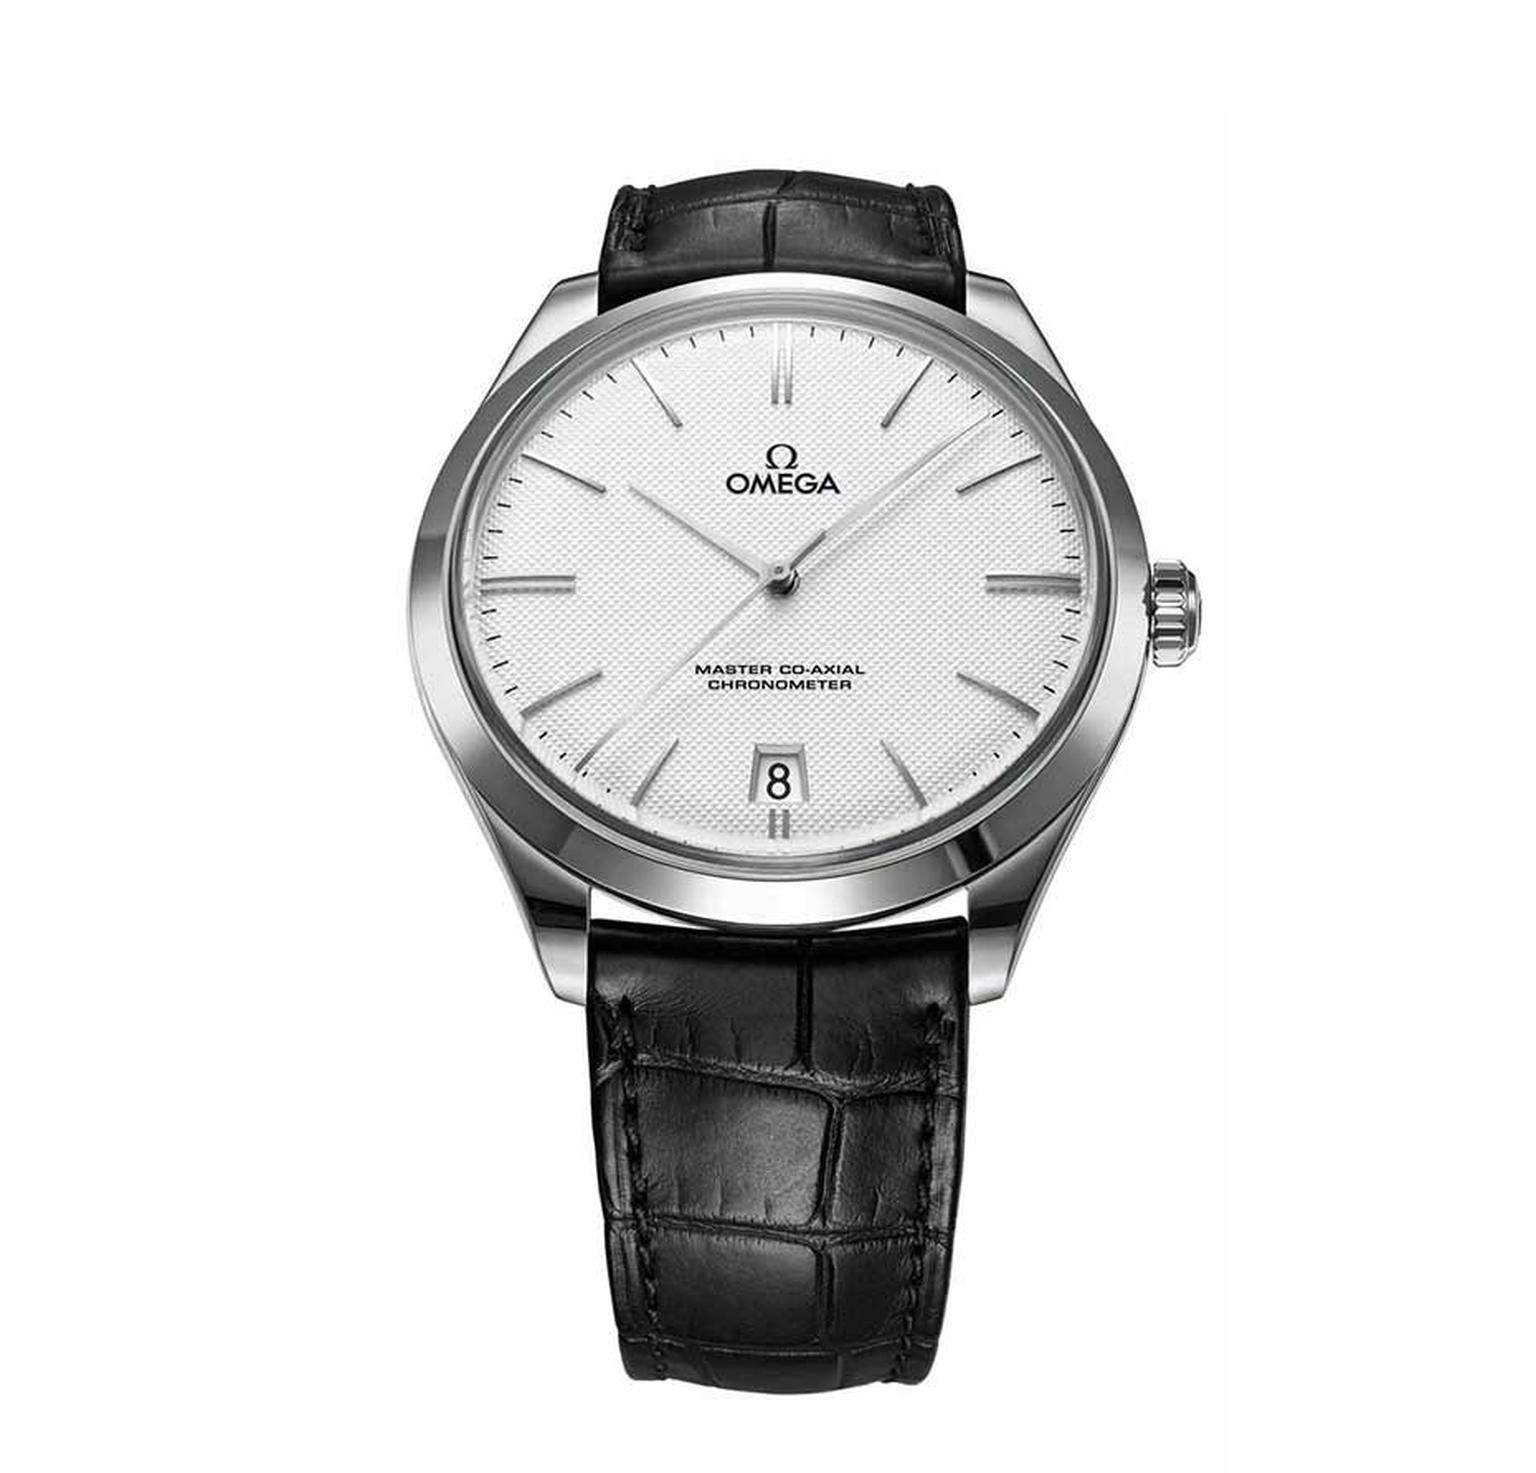 Omega De Ville Tre´sor men's dress watch in white gold inspired by the original De Ville watches of 1949. This was the model worn by George Clooney on his wedding day.